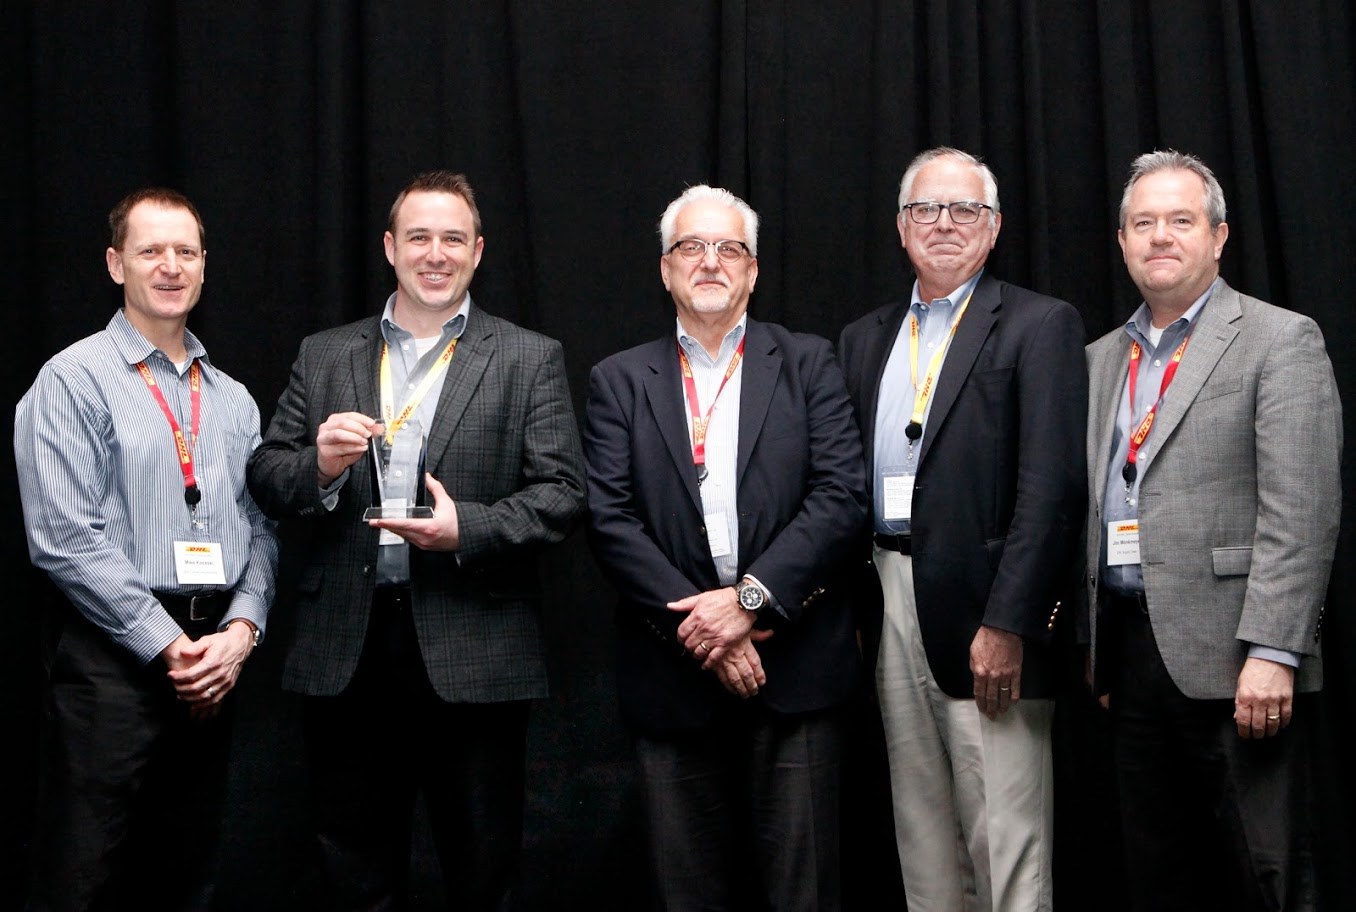 Radiant Clipper Wins Top Intermodal Carrier for DHL Supply Chain